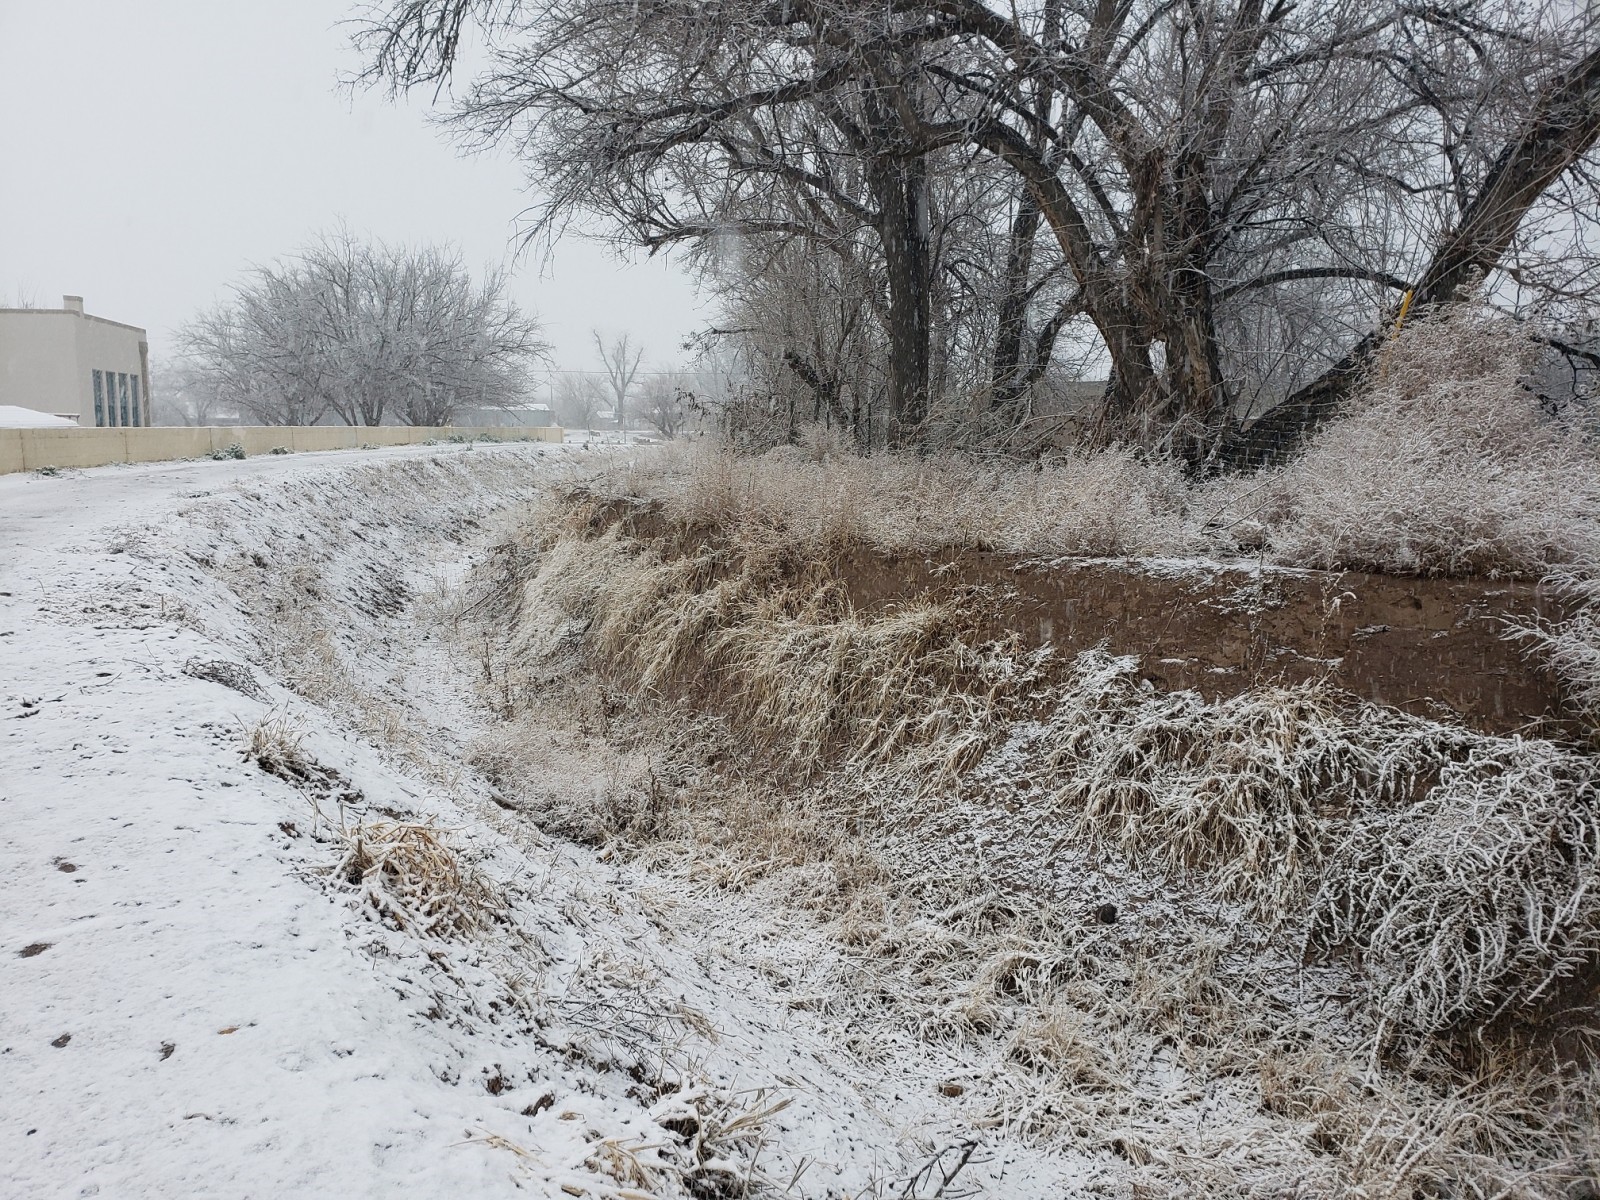 Snow covers Mesilla's acequia madre (main irrigation ditch) to the west of the Taylor-Mesilla Historic Property.